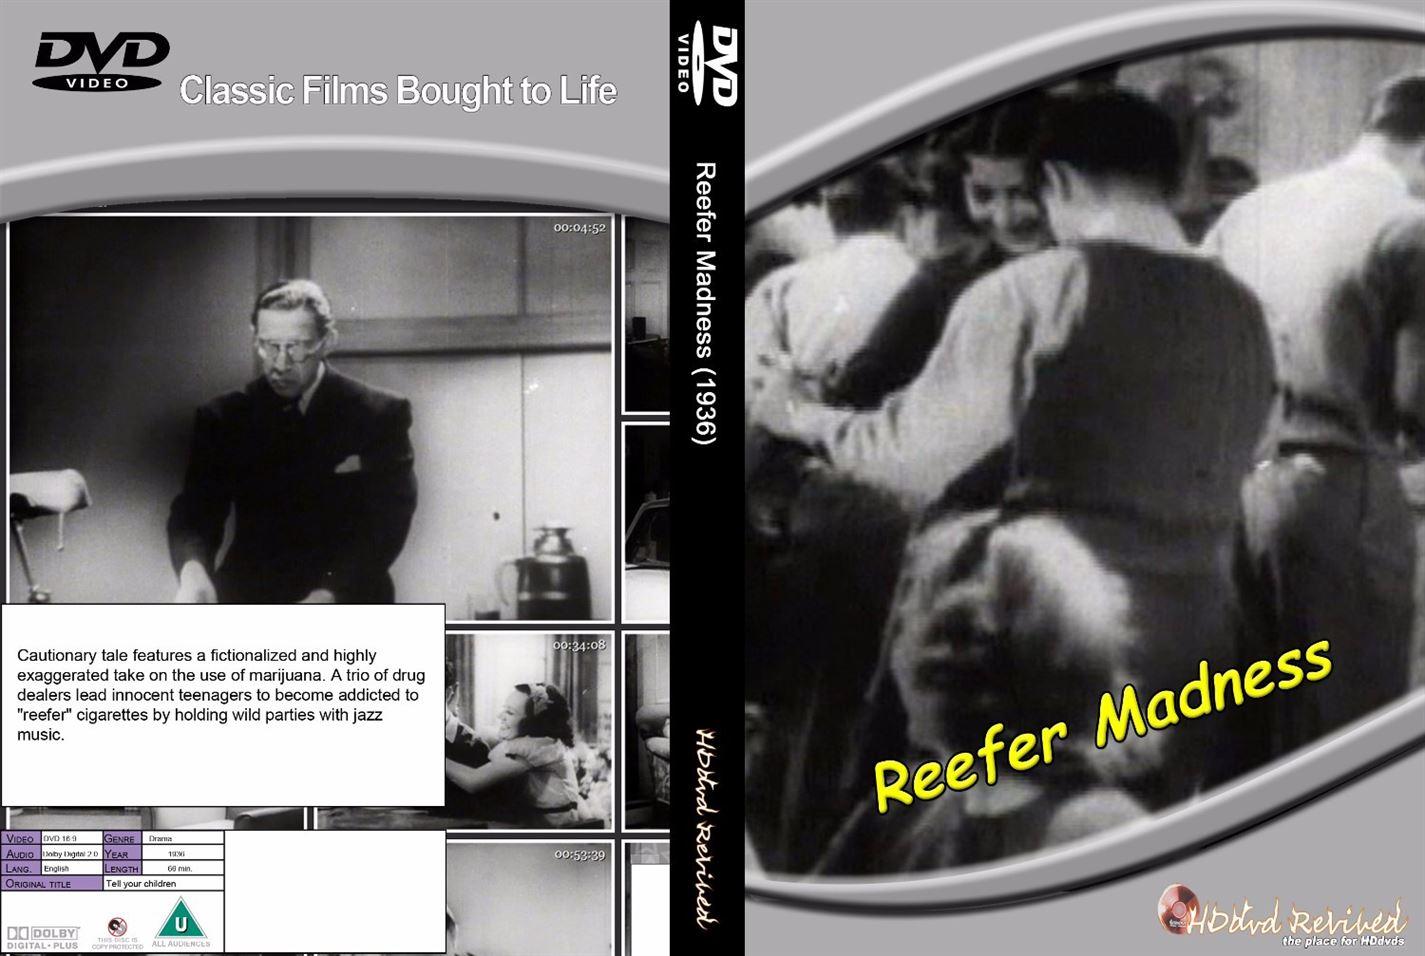 Reefer Madness (1936) - DVD - (HDDVD-Revived) - NEW